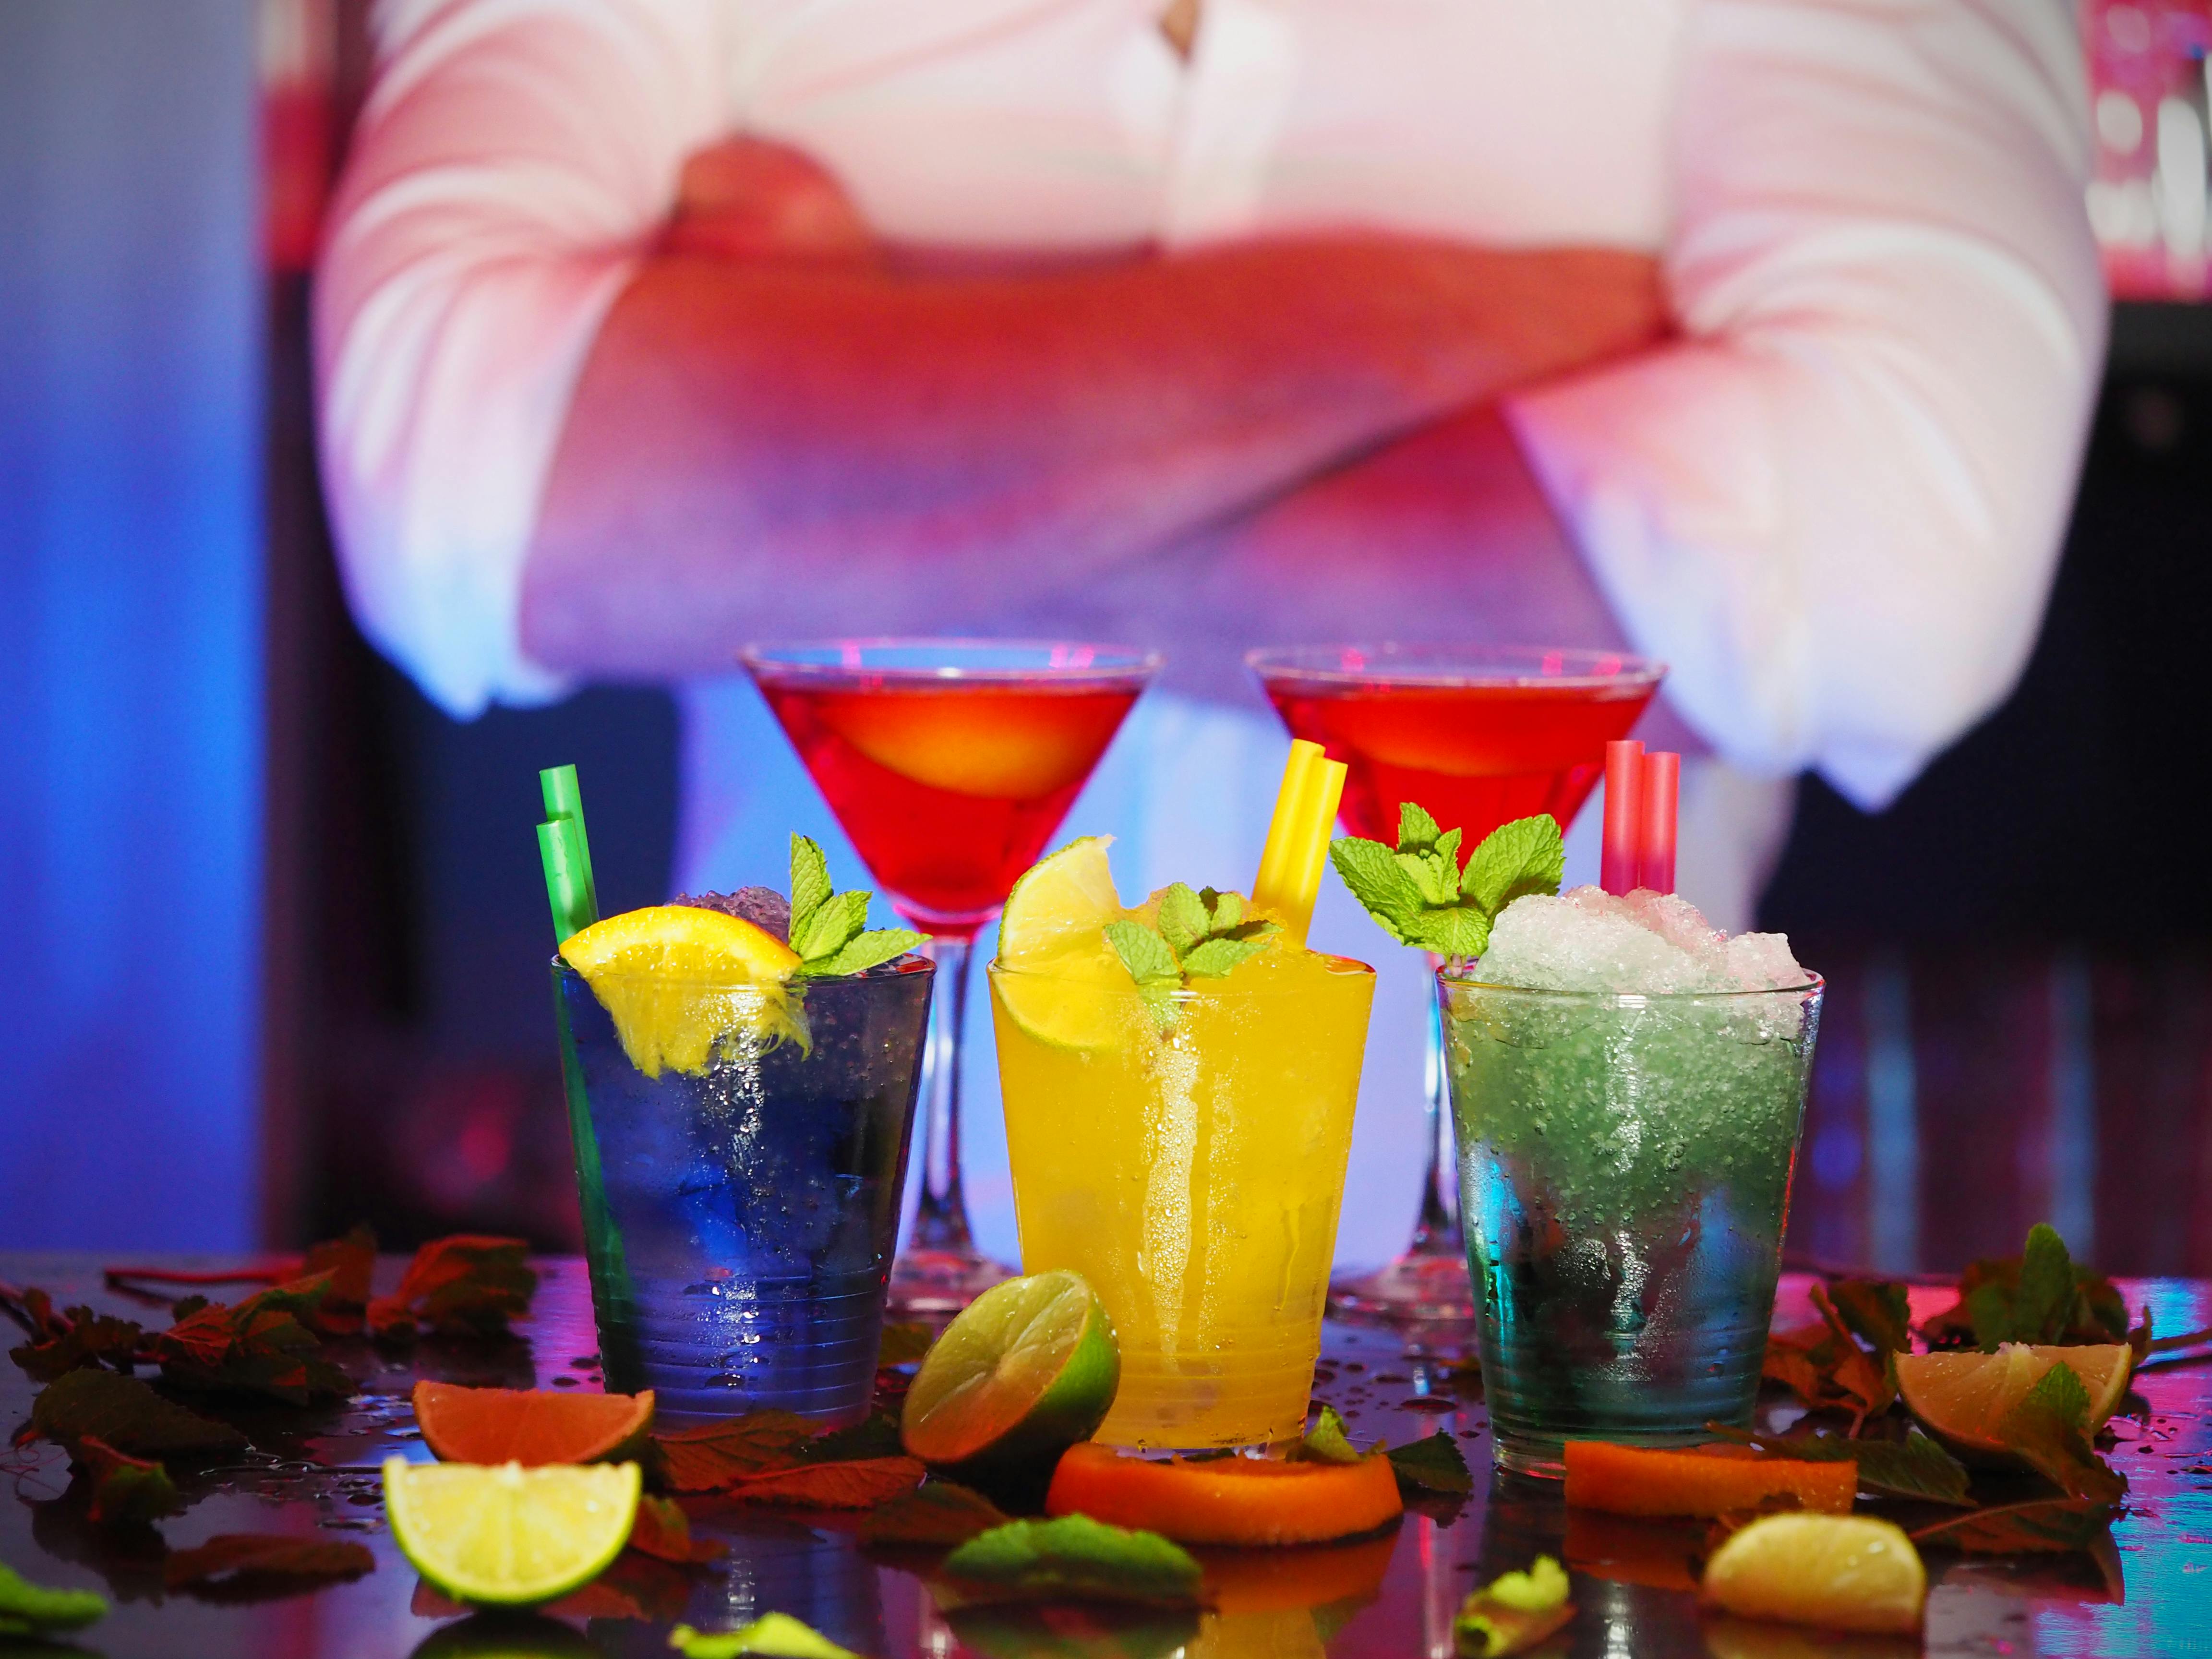 Bartender Photos, Download The BEST Free Bartender Stock Photos & HD Images